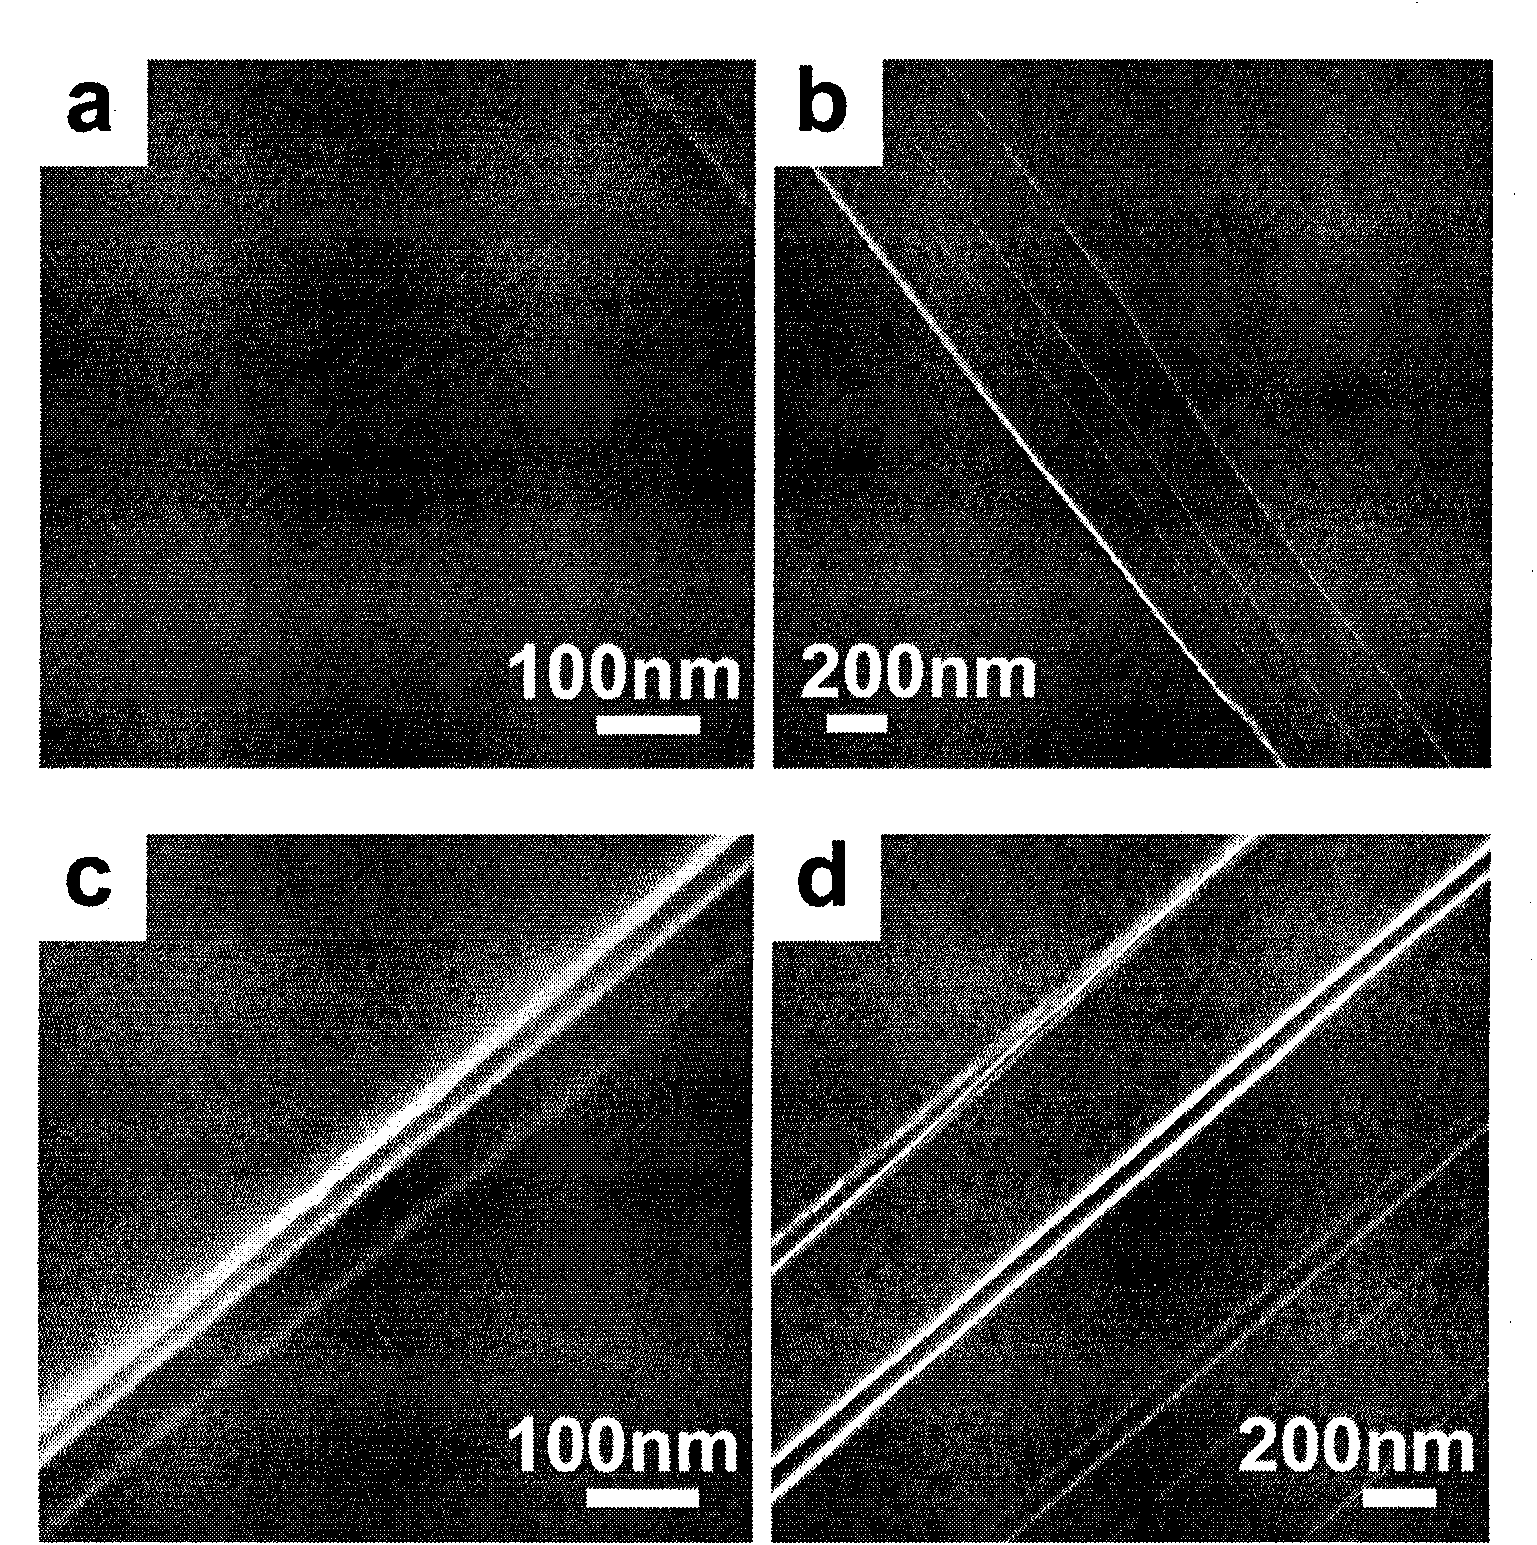 Method for producing graphene belts in controllable macroscopic quantity by chemically cutting grapheme